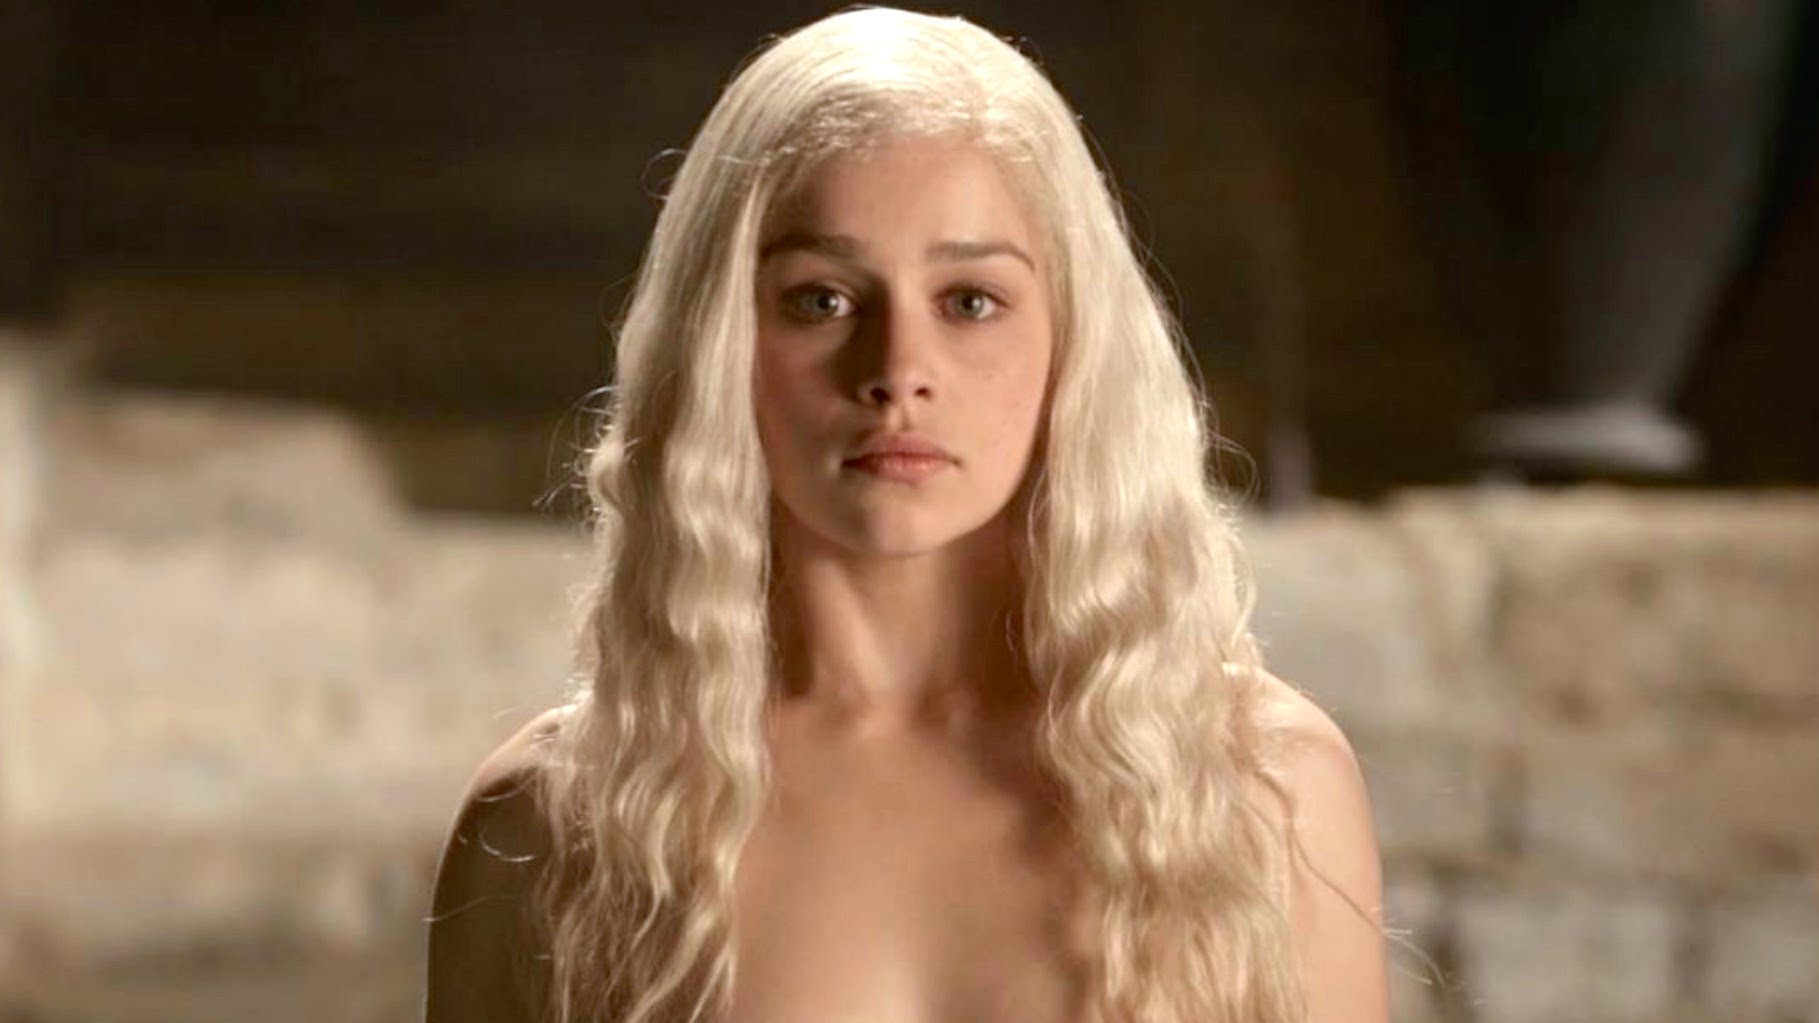 game of thrones sex scenes on pornhub inspire hbo crackdown youtube